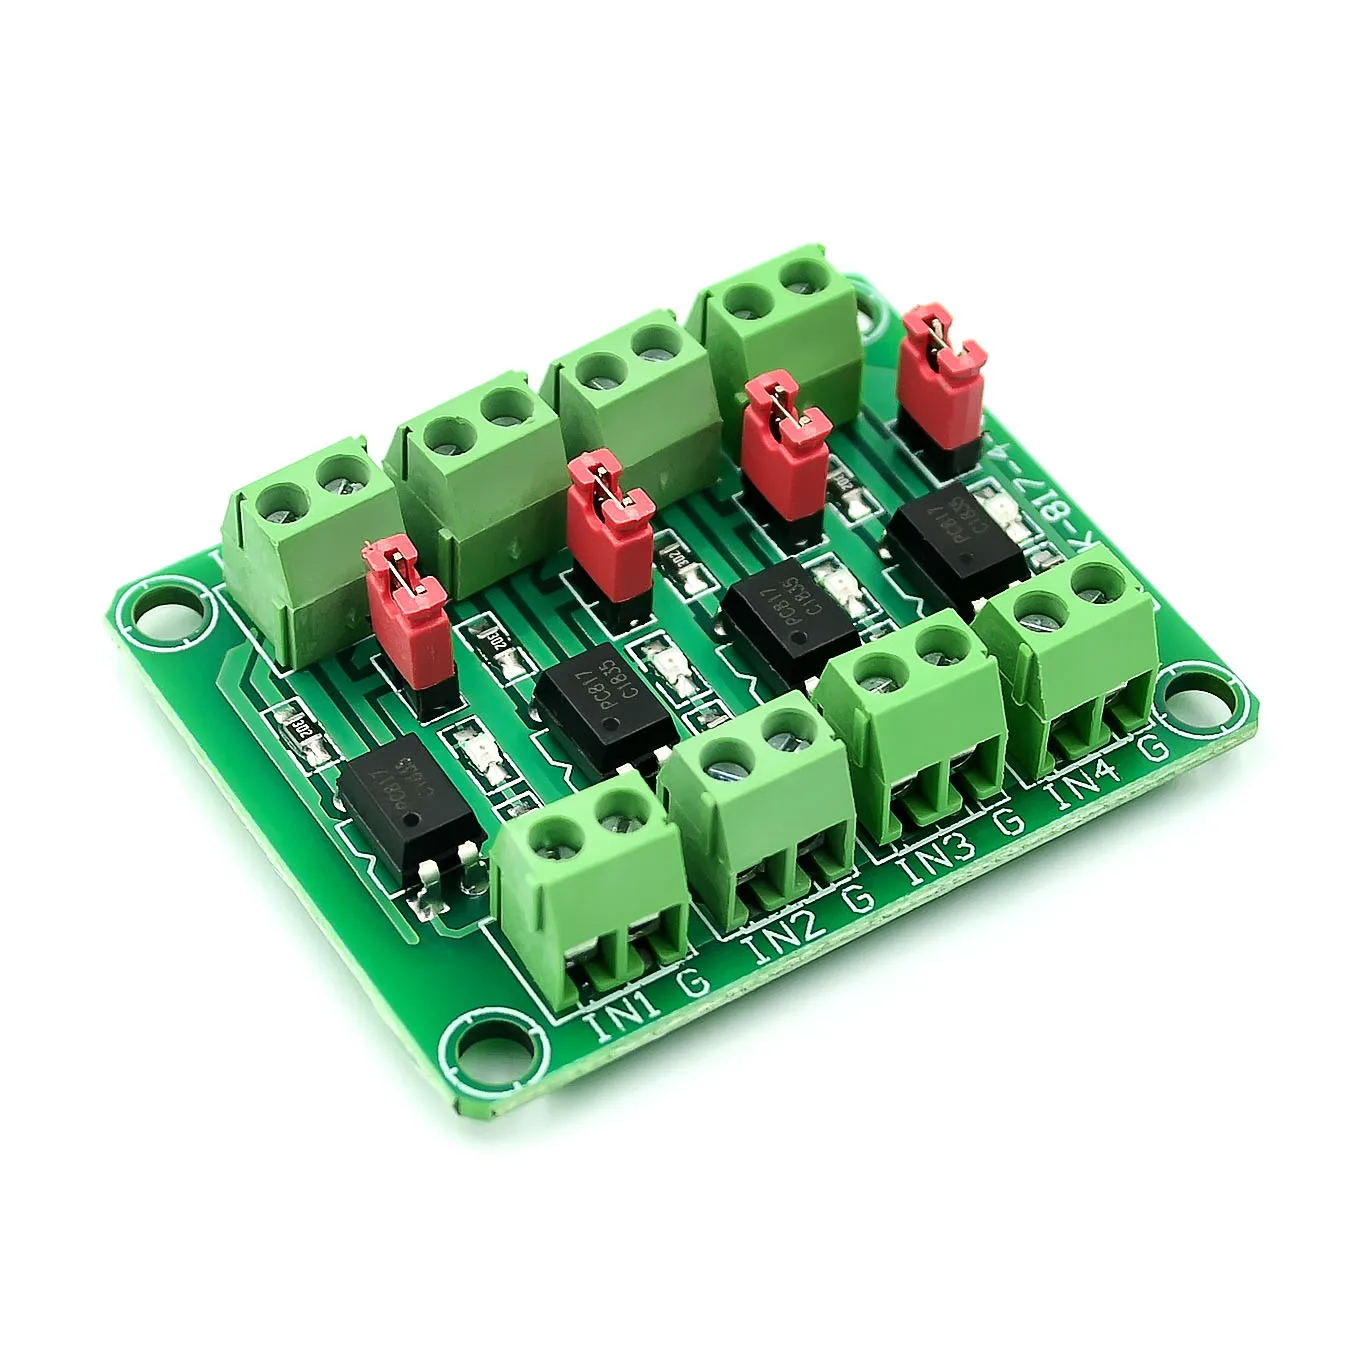 PC817 4 Channel Optocoupler Isolation Board Voltage Converter Adapter Module 